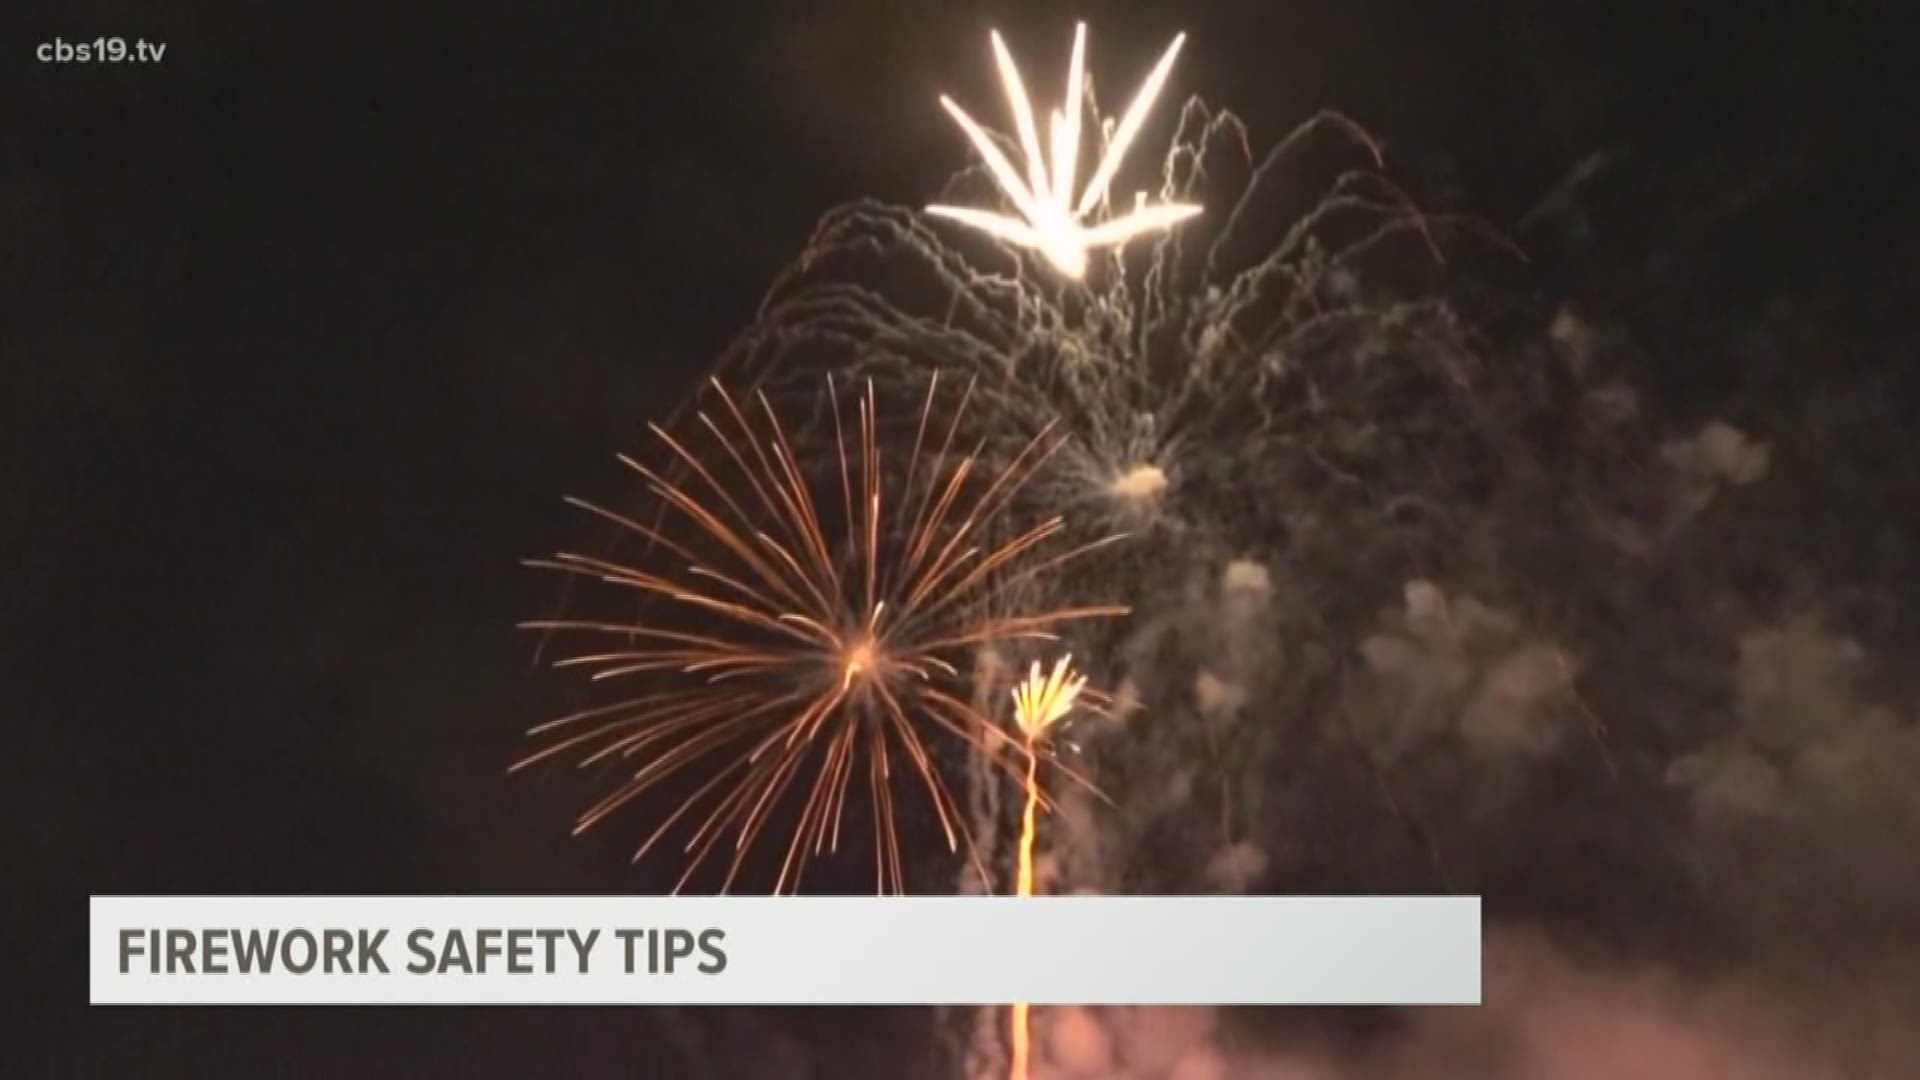 If you plan to launch fireworks on Independence Day, keep these tips in mind to stay safe.